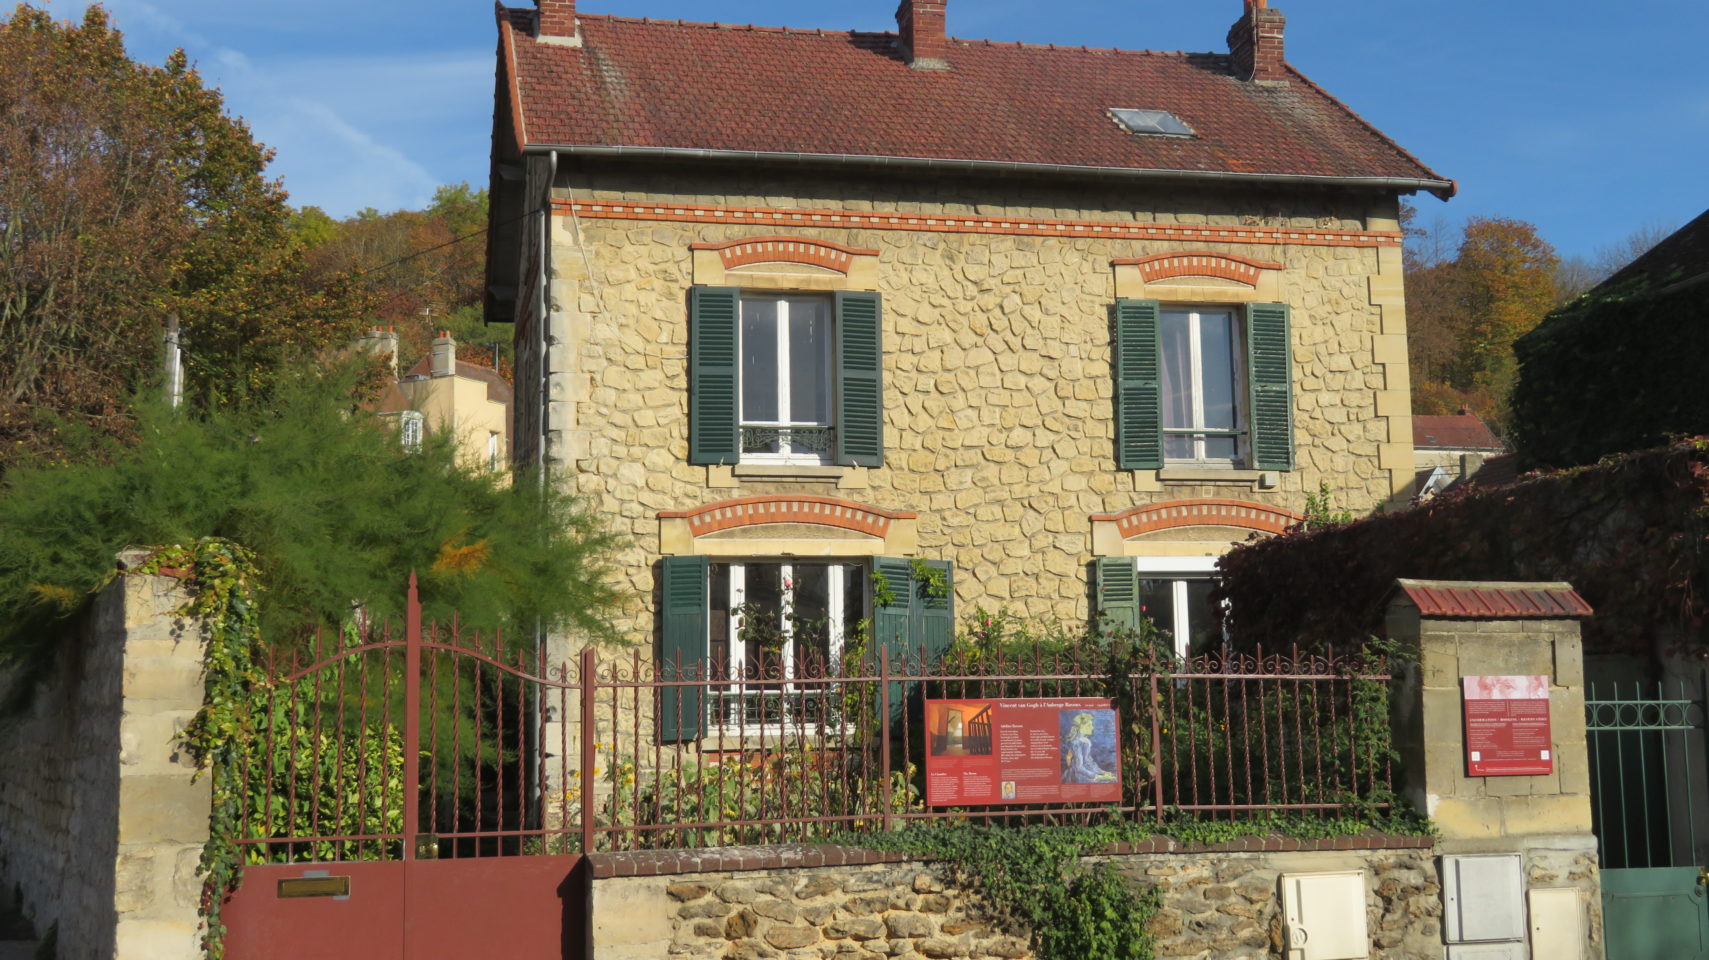 Vincent Van Gogh lived at Auberge Ravoux in Auvers-sur-Oise, France (Paris and Normandie AMAWaterways Cruise)